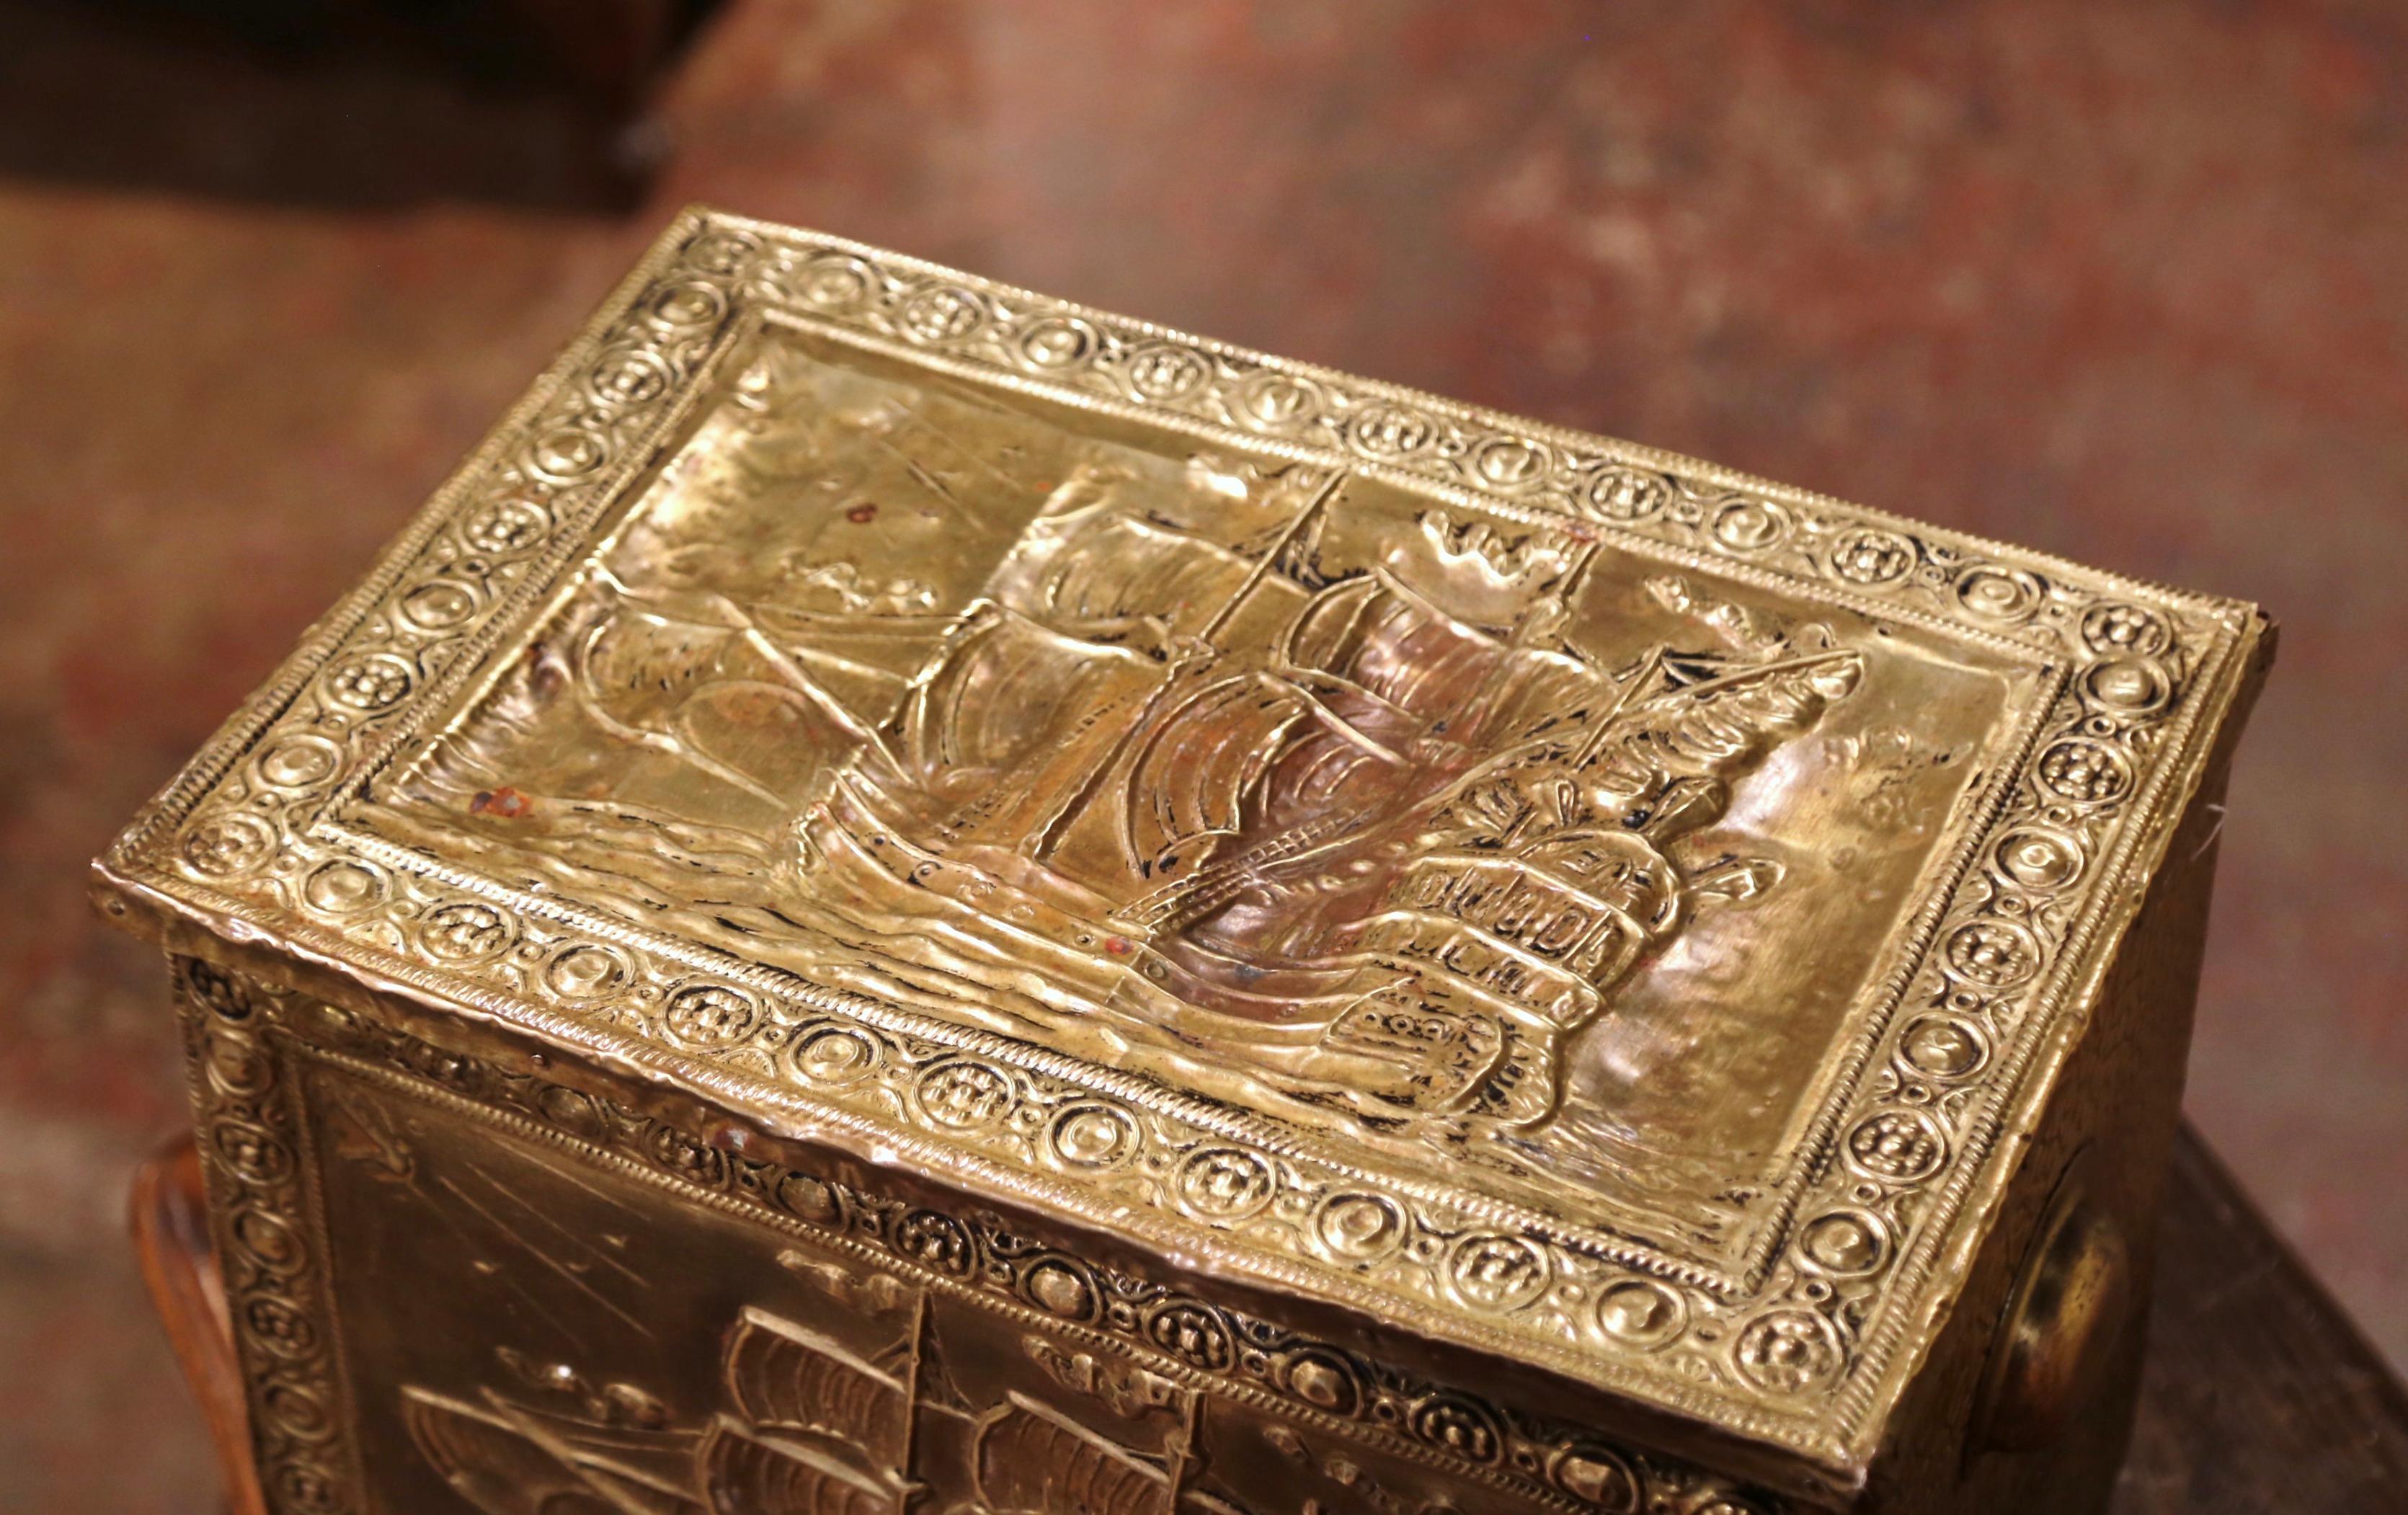 Repoussé 19th Century French Repousse Brass and Wood Box with Sailboat Decor